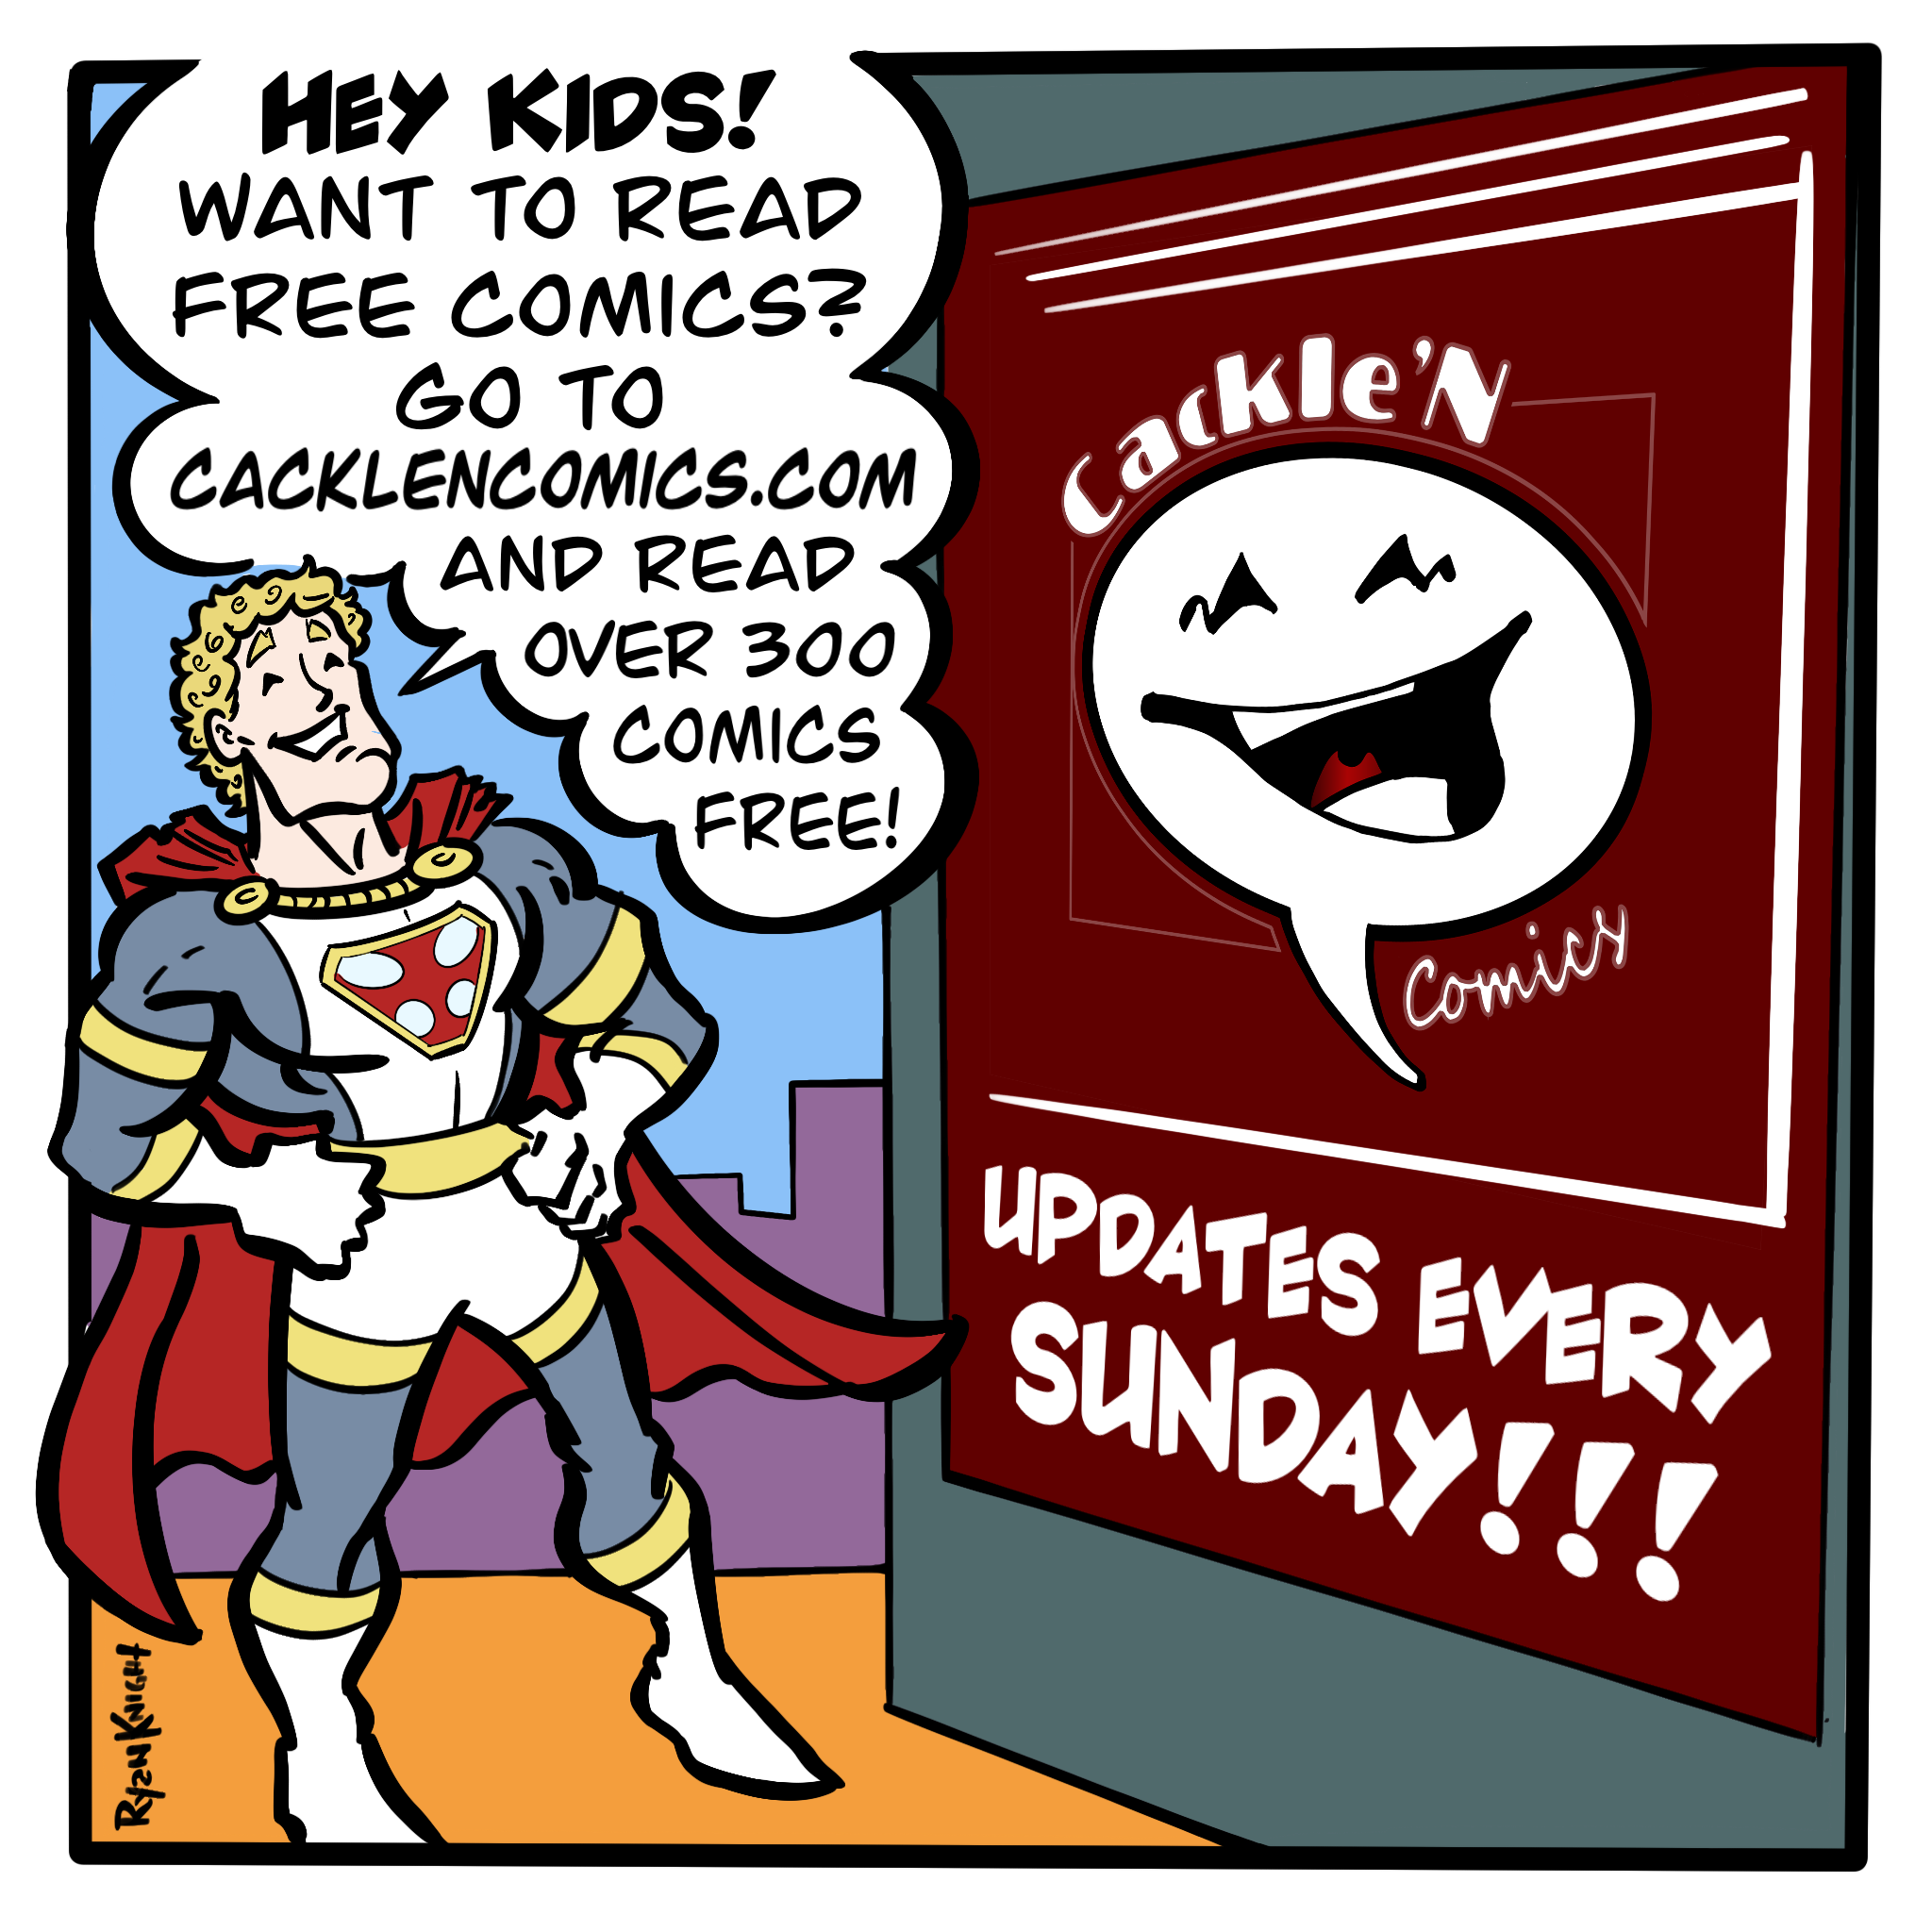 Cackle’N Comics updates every Sunday!